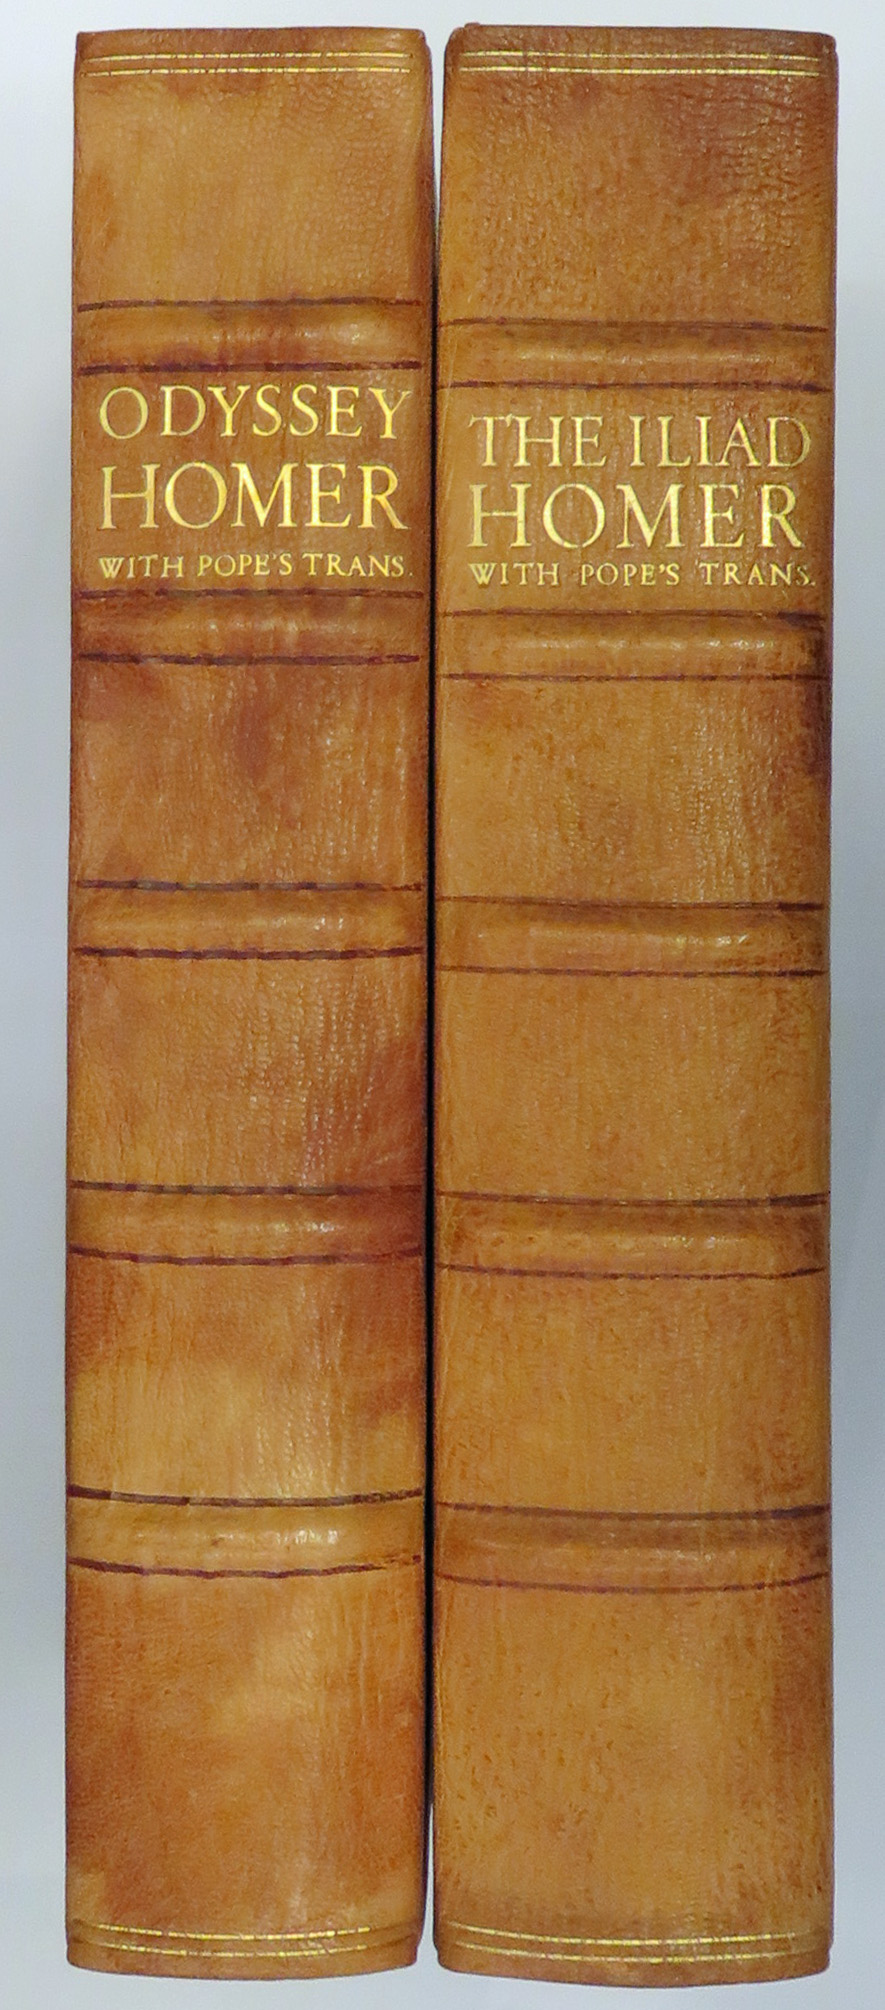 The Iliad and Odyssey of Homer in Two Volumes